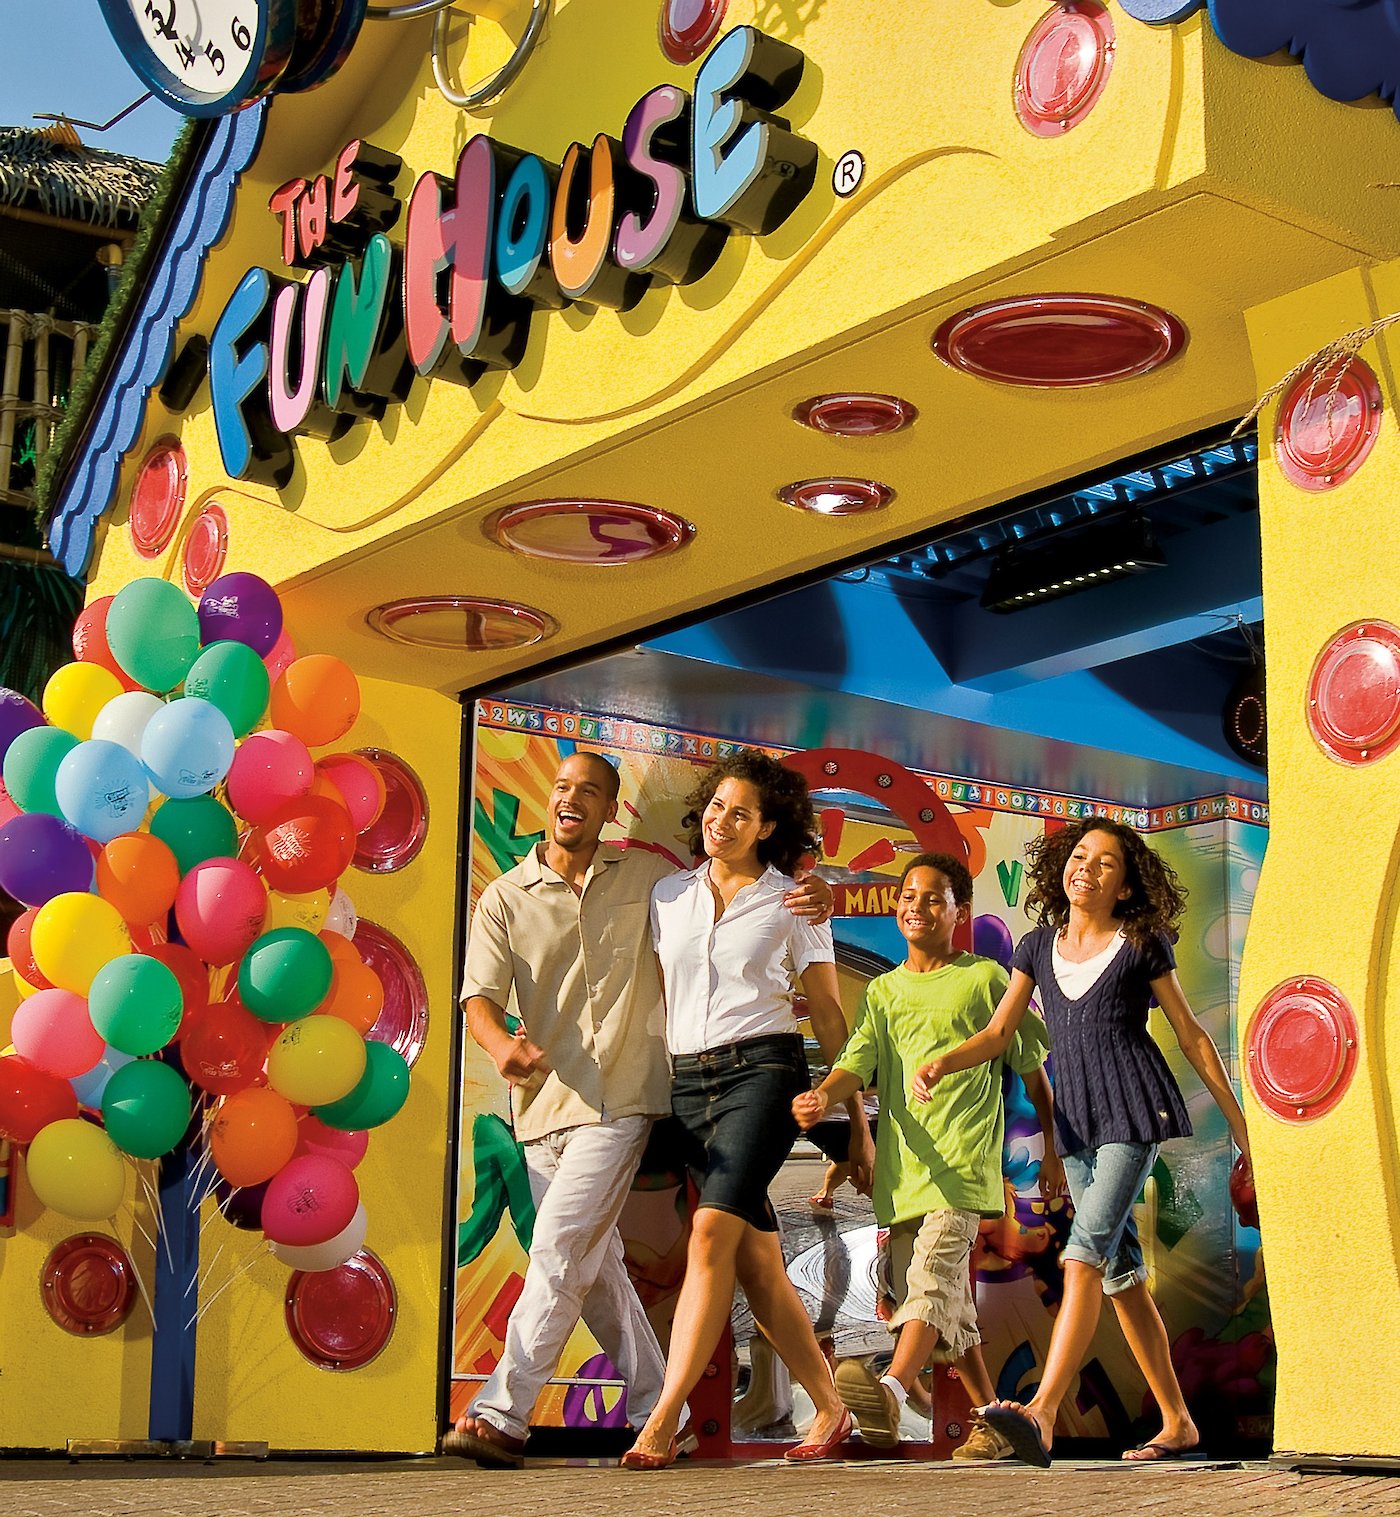 Clifton hill attractions fun house